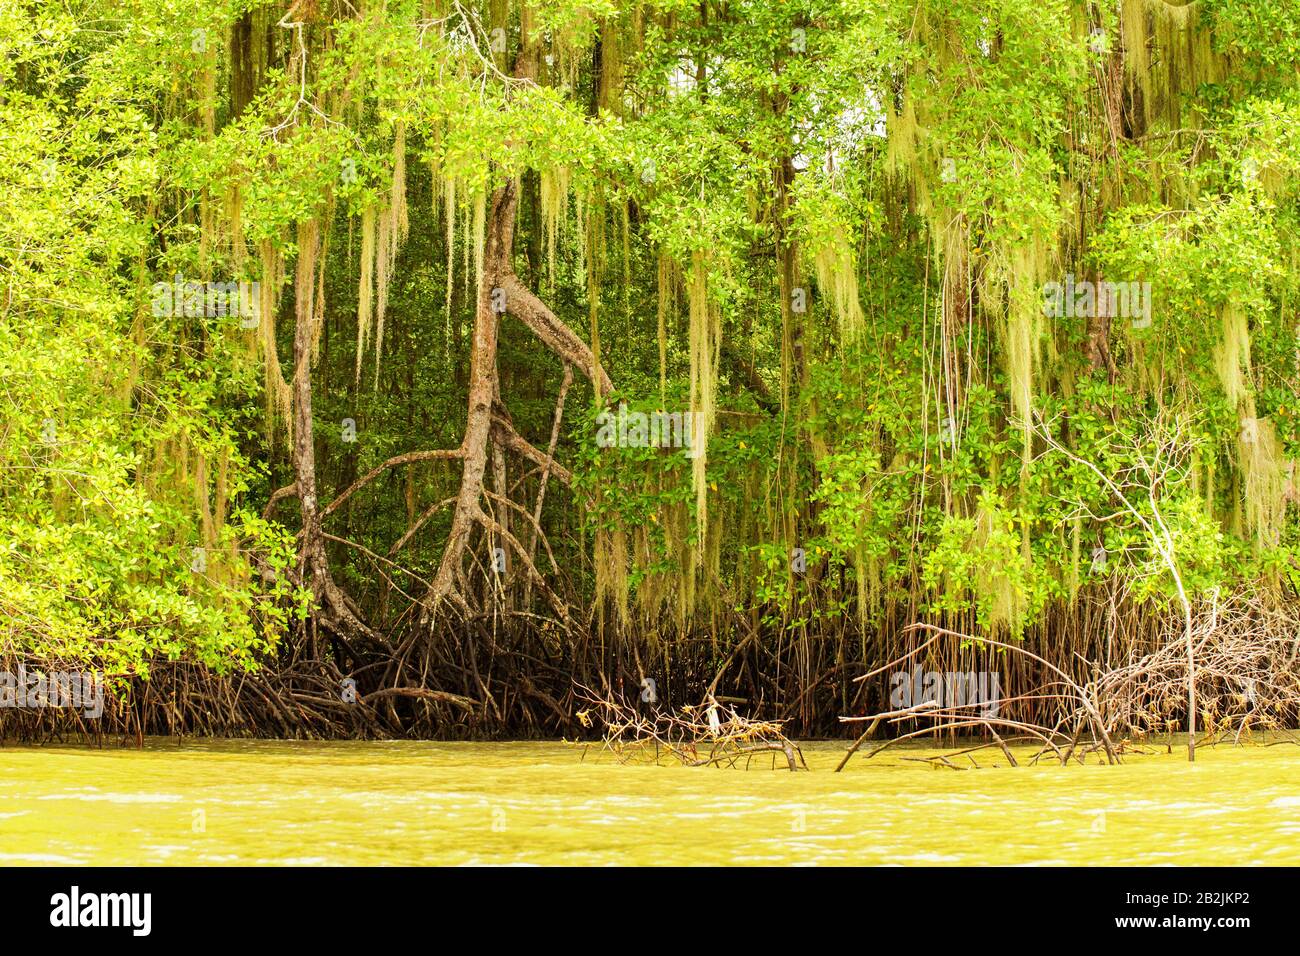 Tall Mangrove Plants From The Order Of Bruguiera Gymnorrhiza In A Bright Sunny Day Ecuador Coastline Notice The Tide Size That Appear On The Roots Of Stock Photo